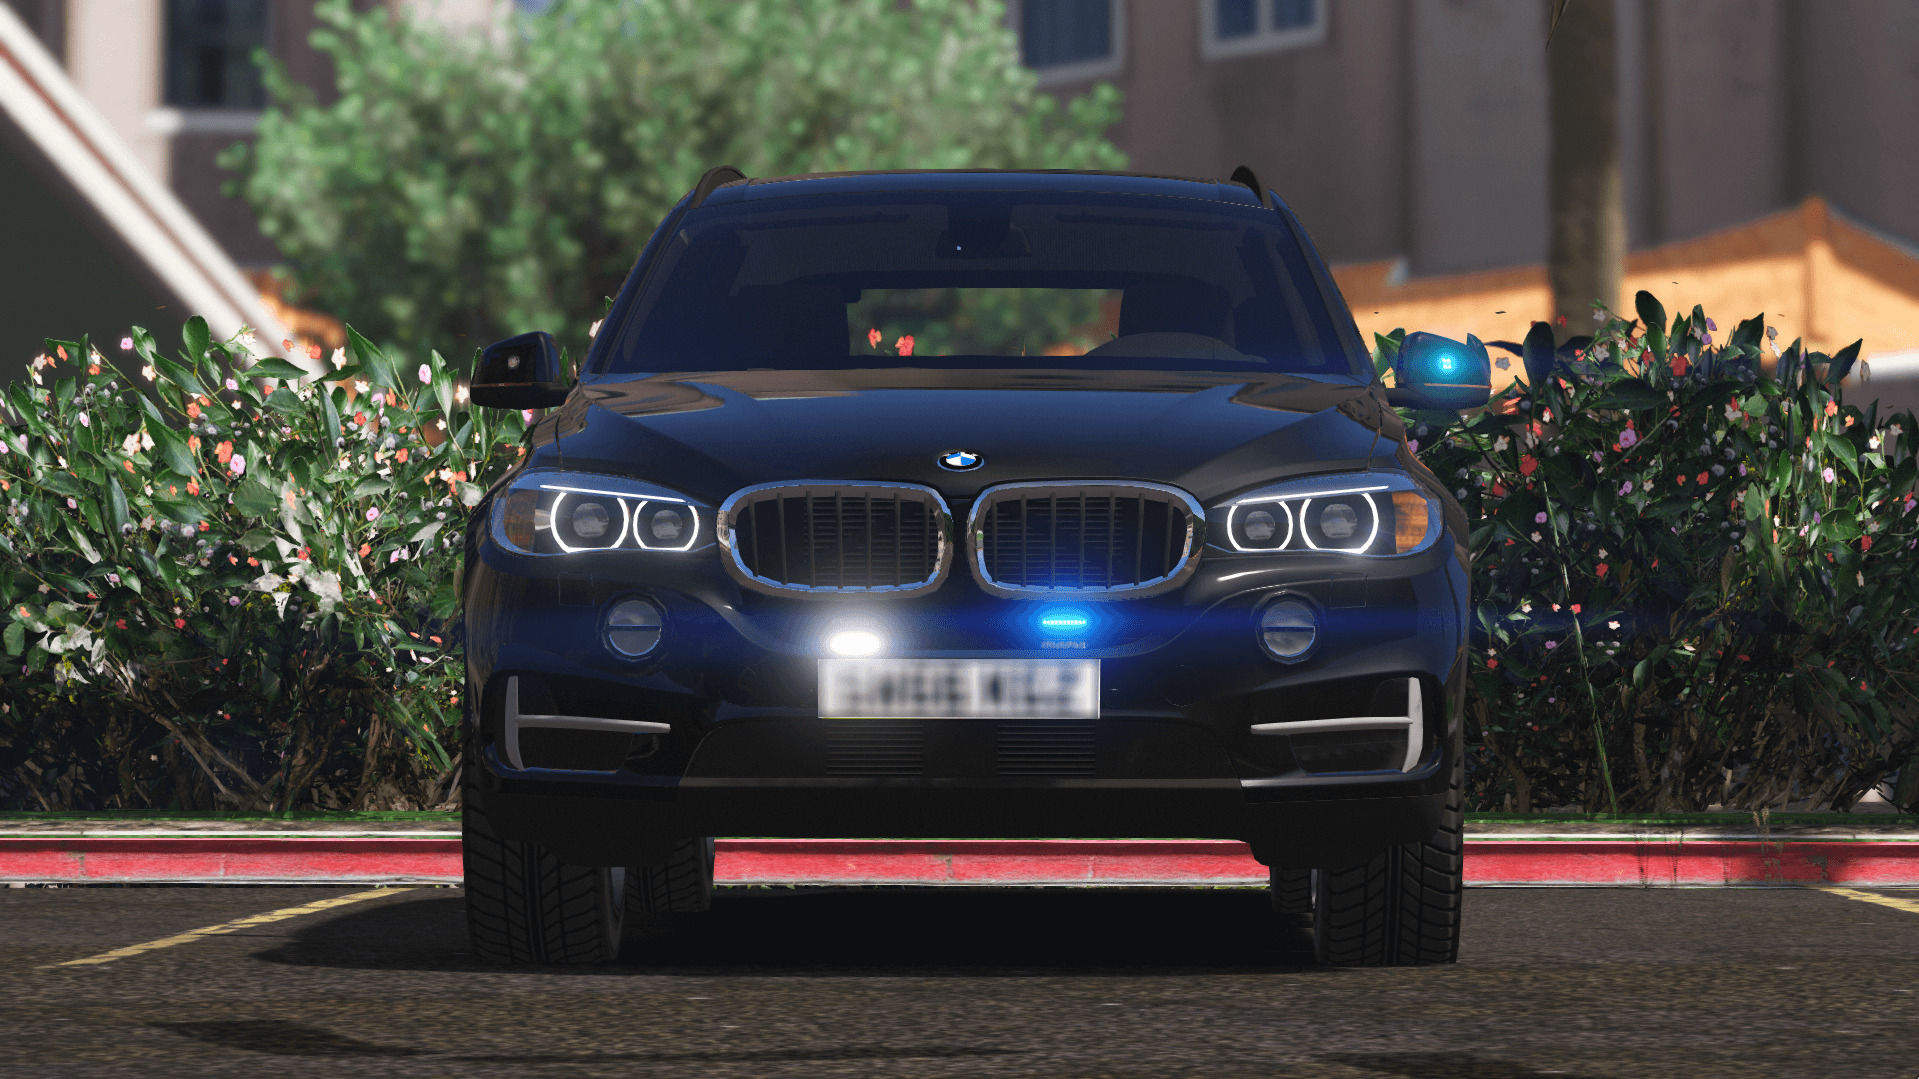 Hampshire Police - Unmarked Armed Response Vehicle - BMW X5 F15 [ELS ...